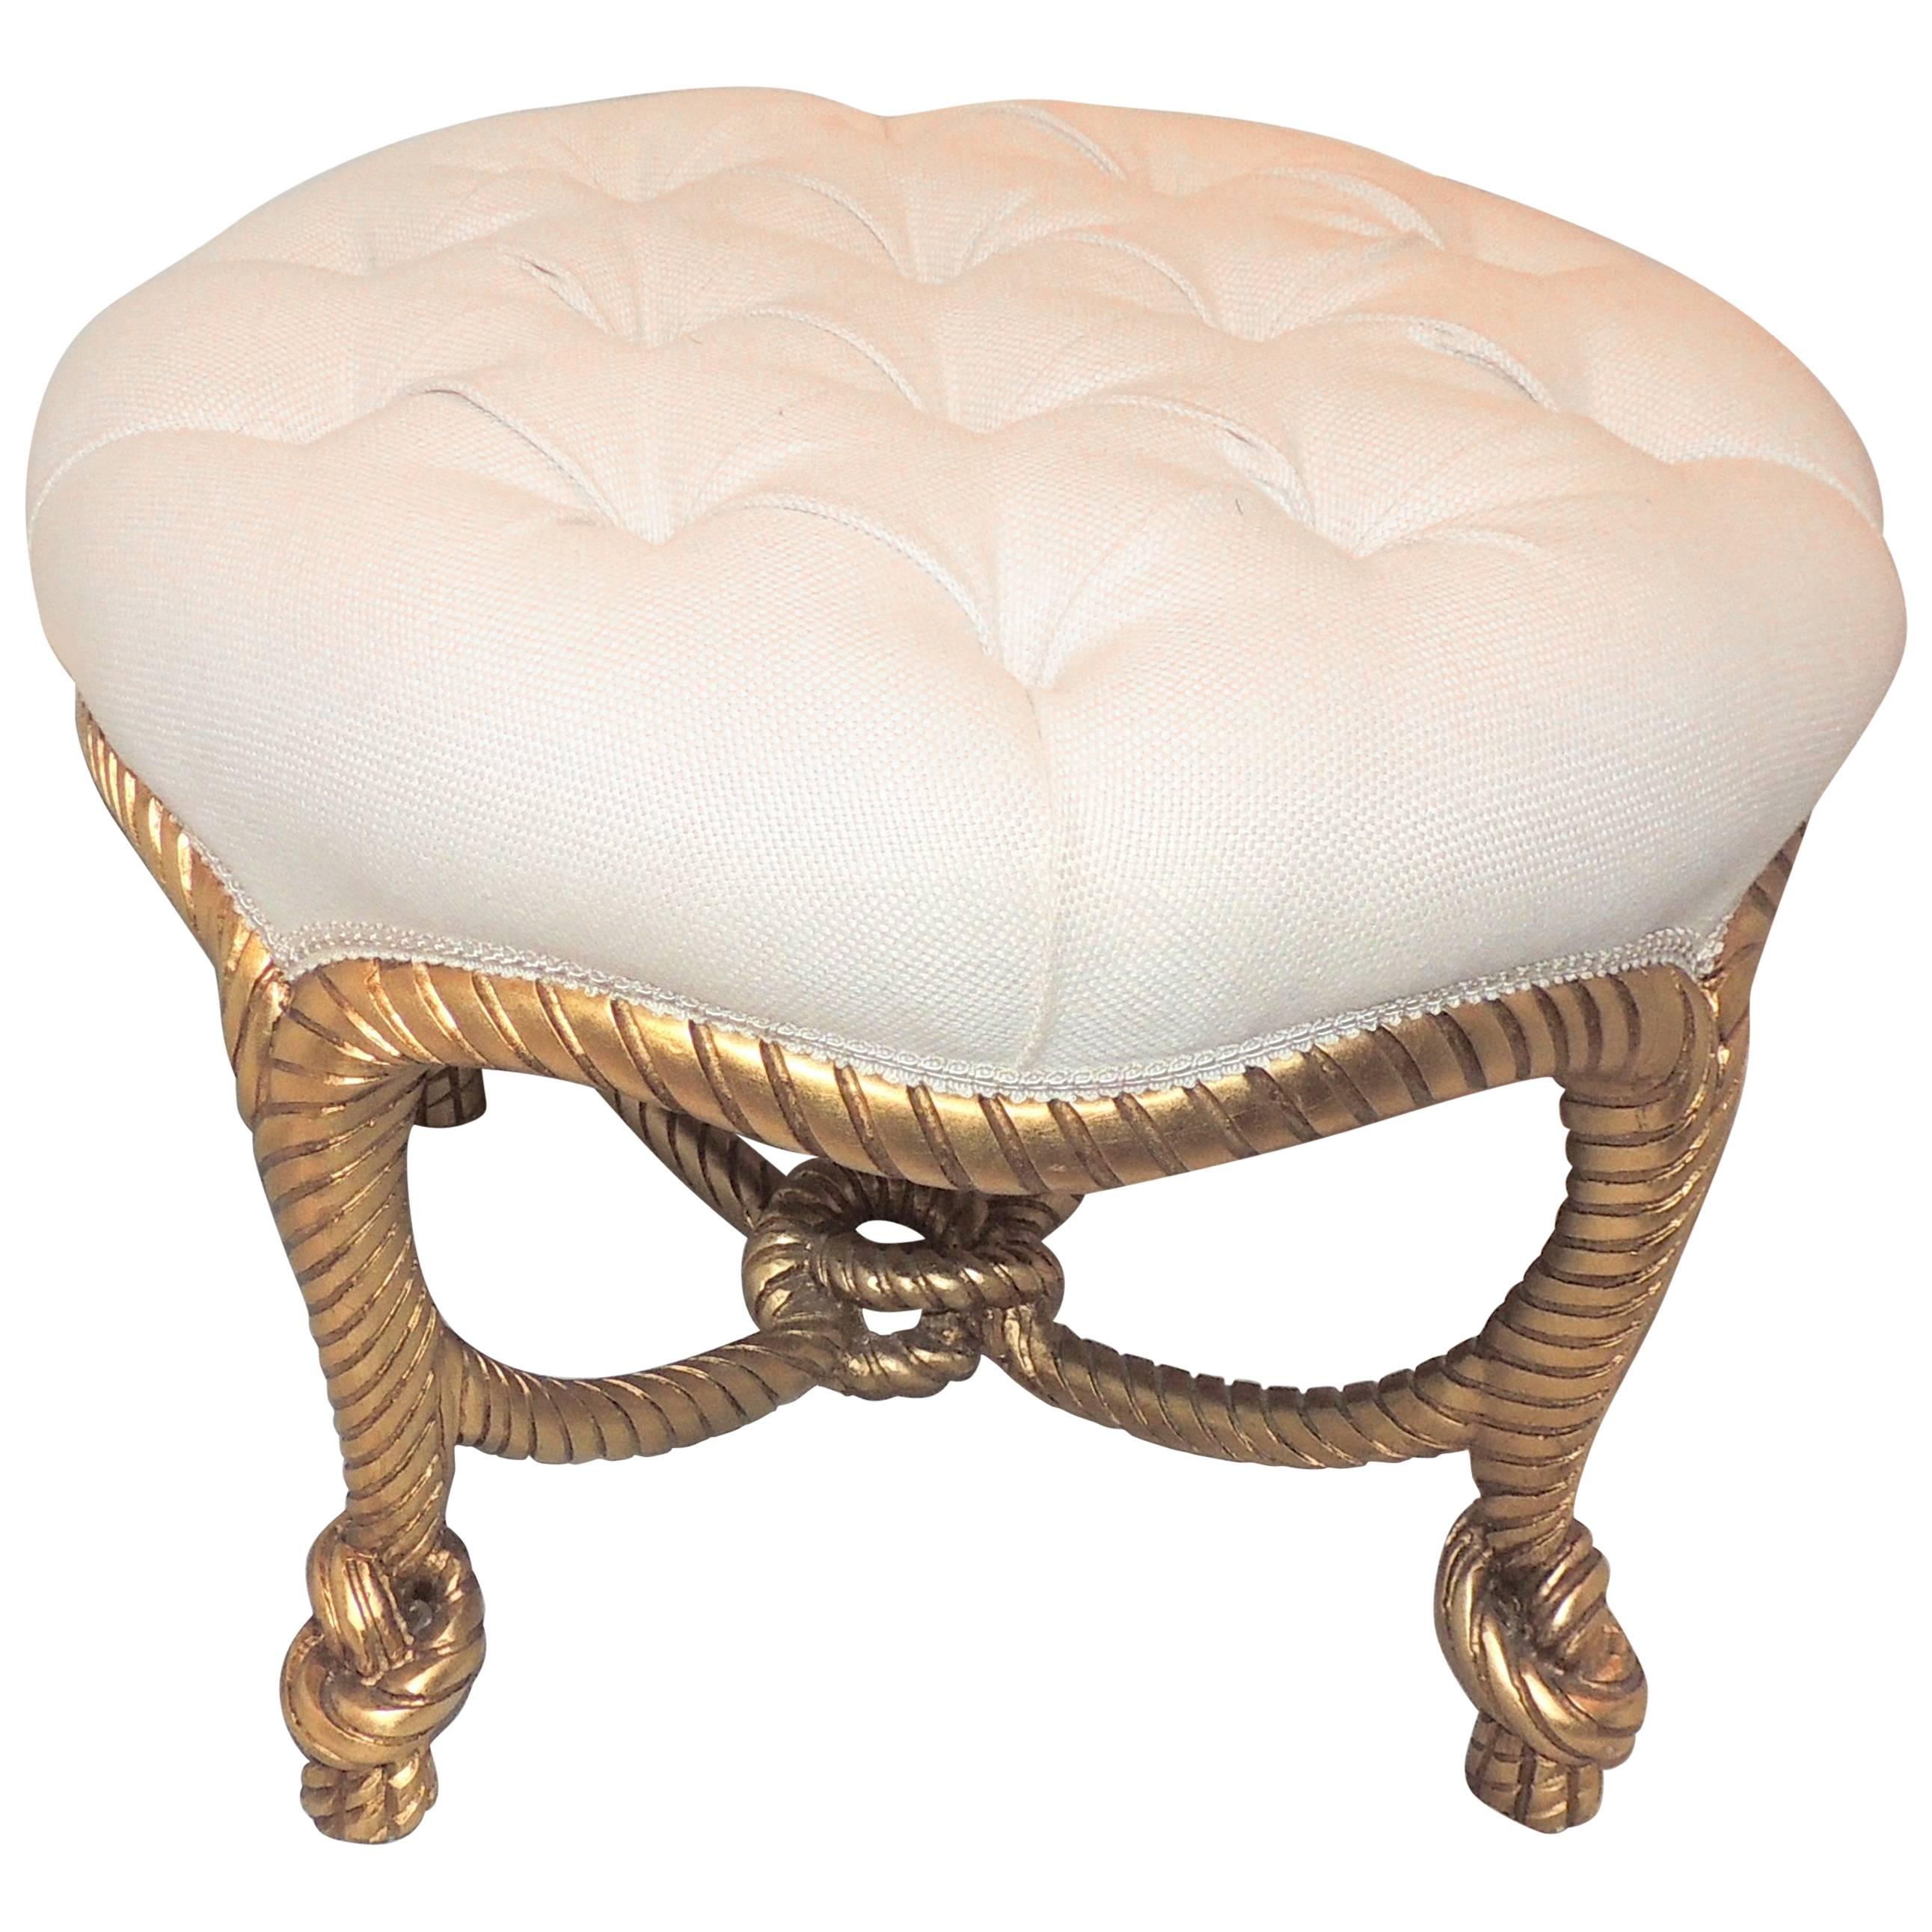 Wonderful French Gilt wood Rope Tassel Bow Tufted Ottoman Round Bench Stool Pouf